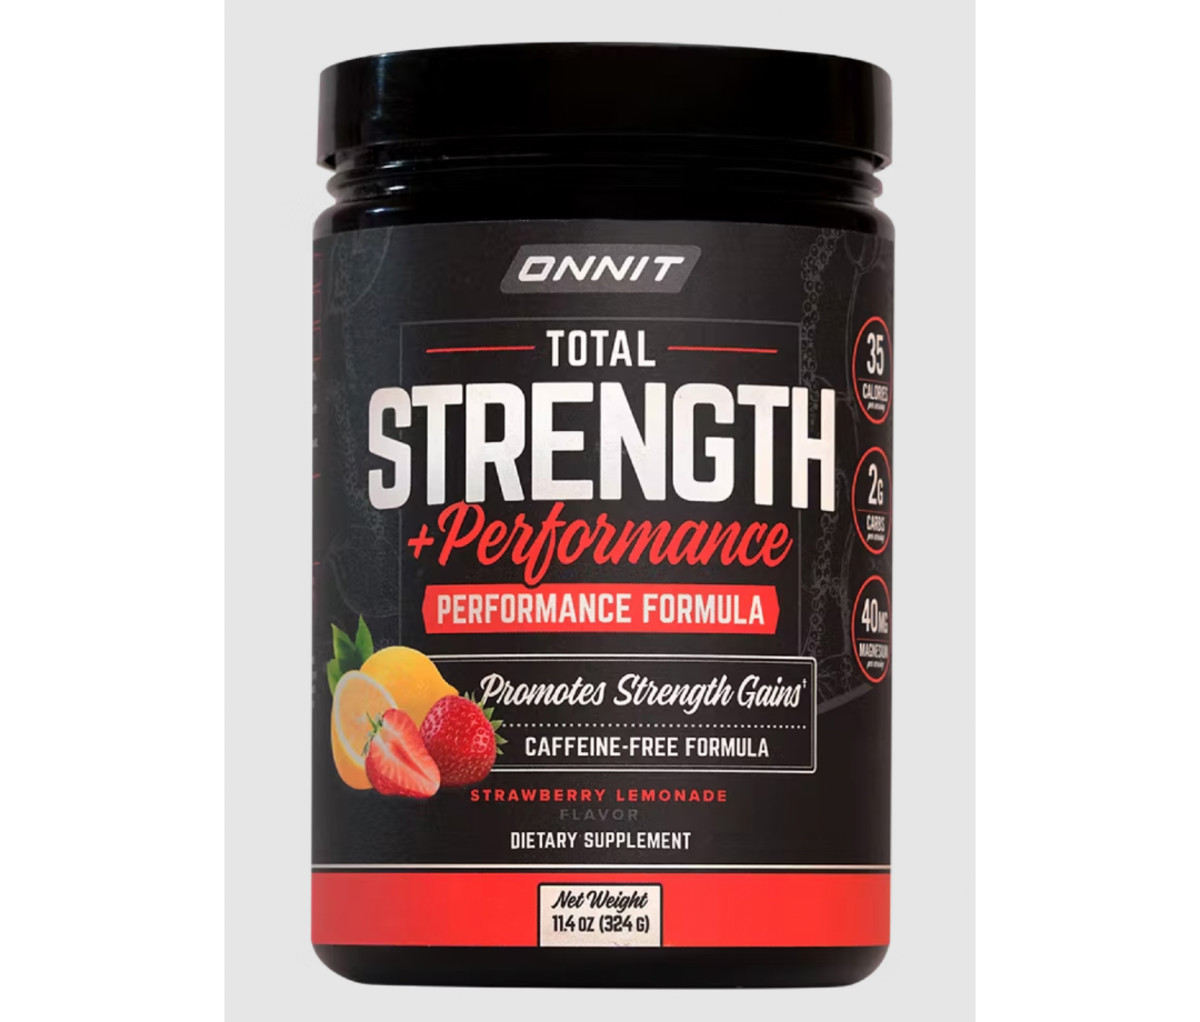 ONNIT Total Strength + Performance